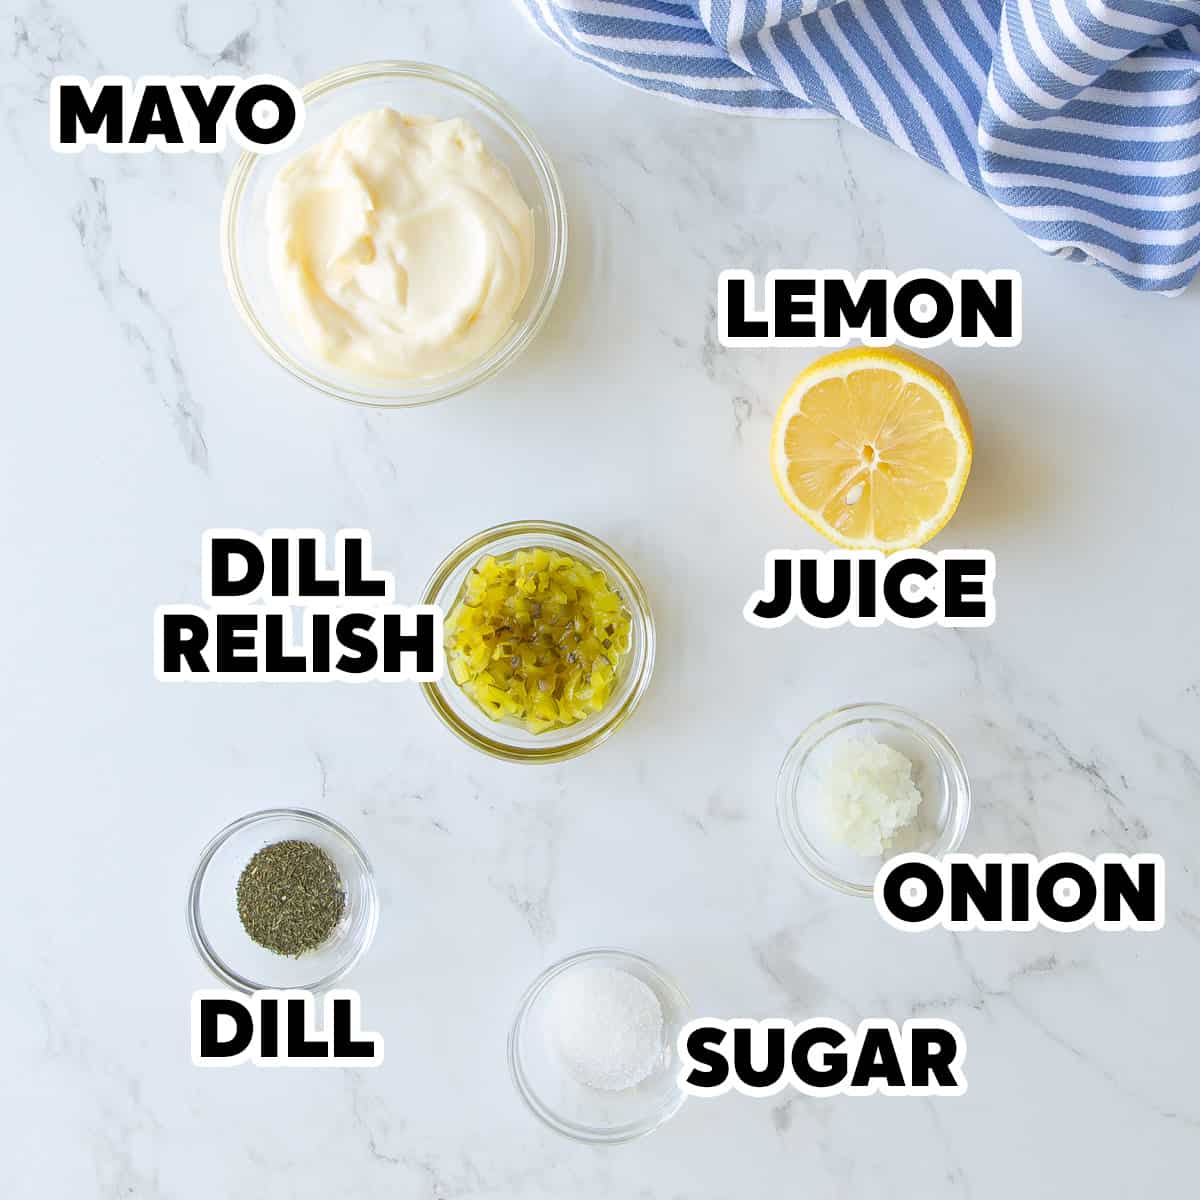 Overhead view of ingredients for making homemade tartar sauce with overlay text.